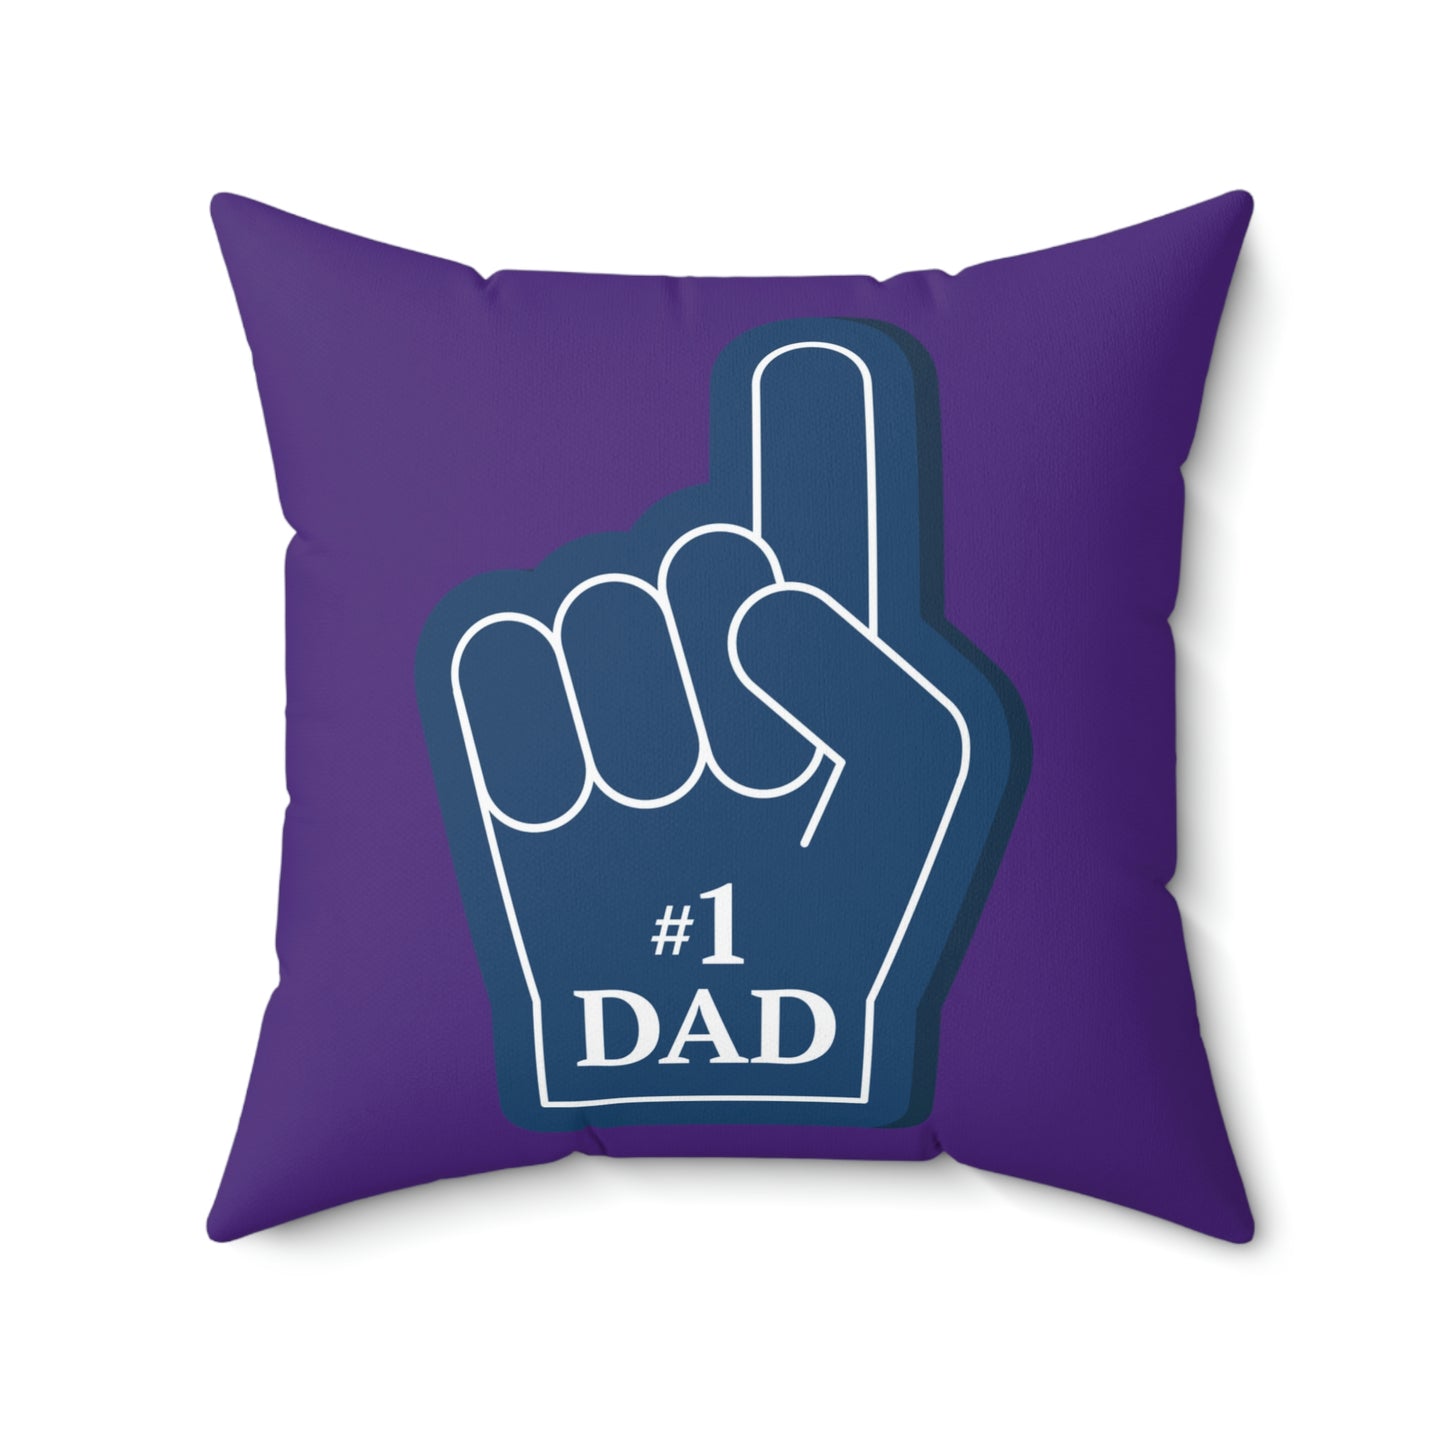 Spun Polyester Square Pillow Case "Number One Dad on Purple”